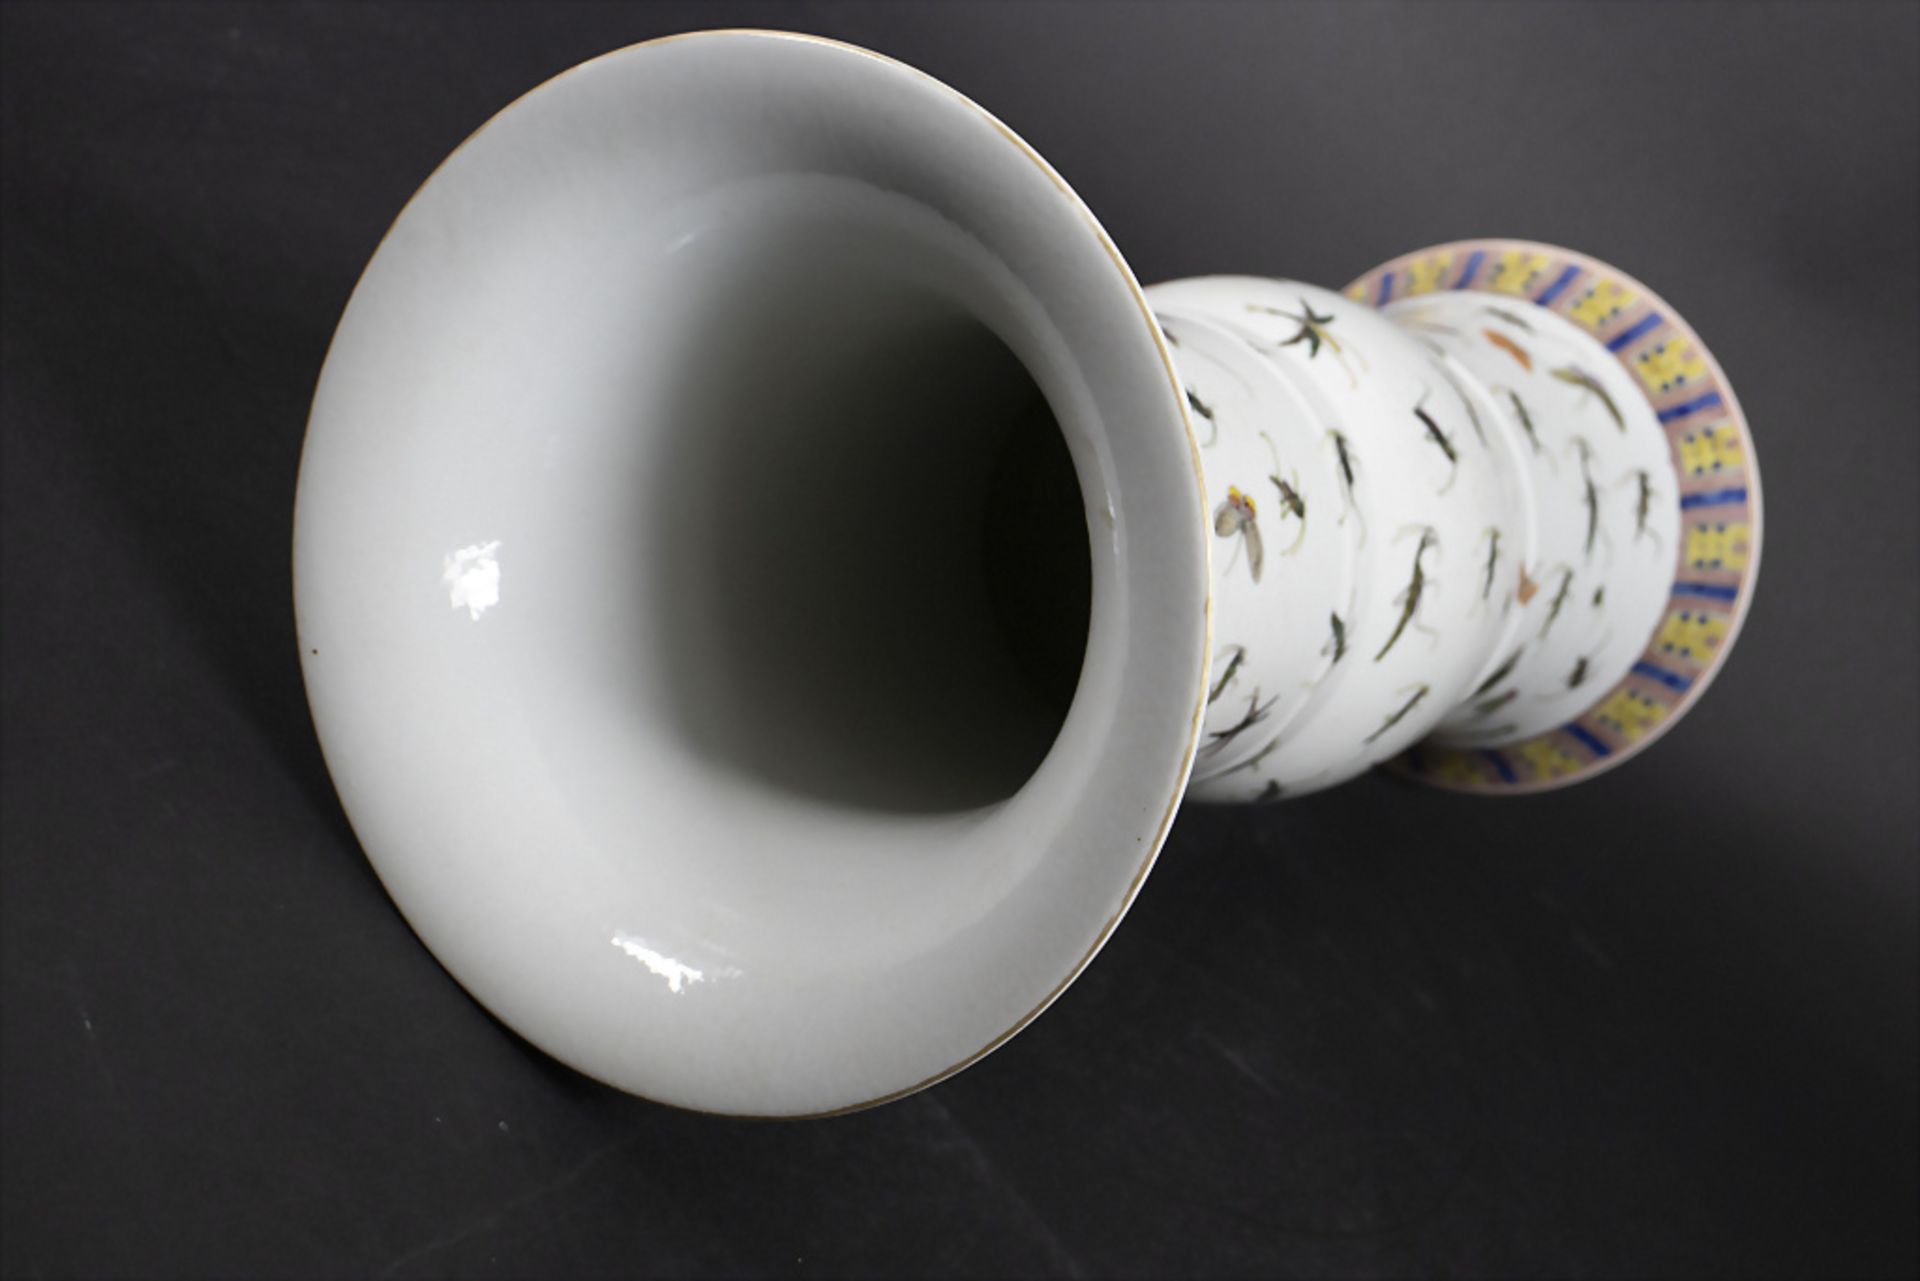 Porzellanvase mit Insekten in Gu Form / A GU shaped porcelain vase wih insects, China, 19./20. Jh. - Image 7 of 9